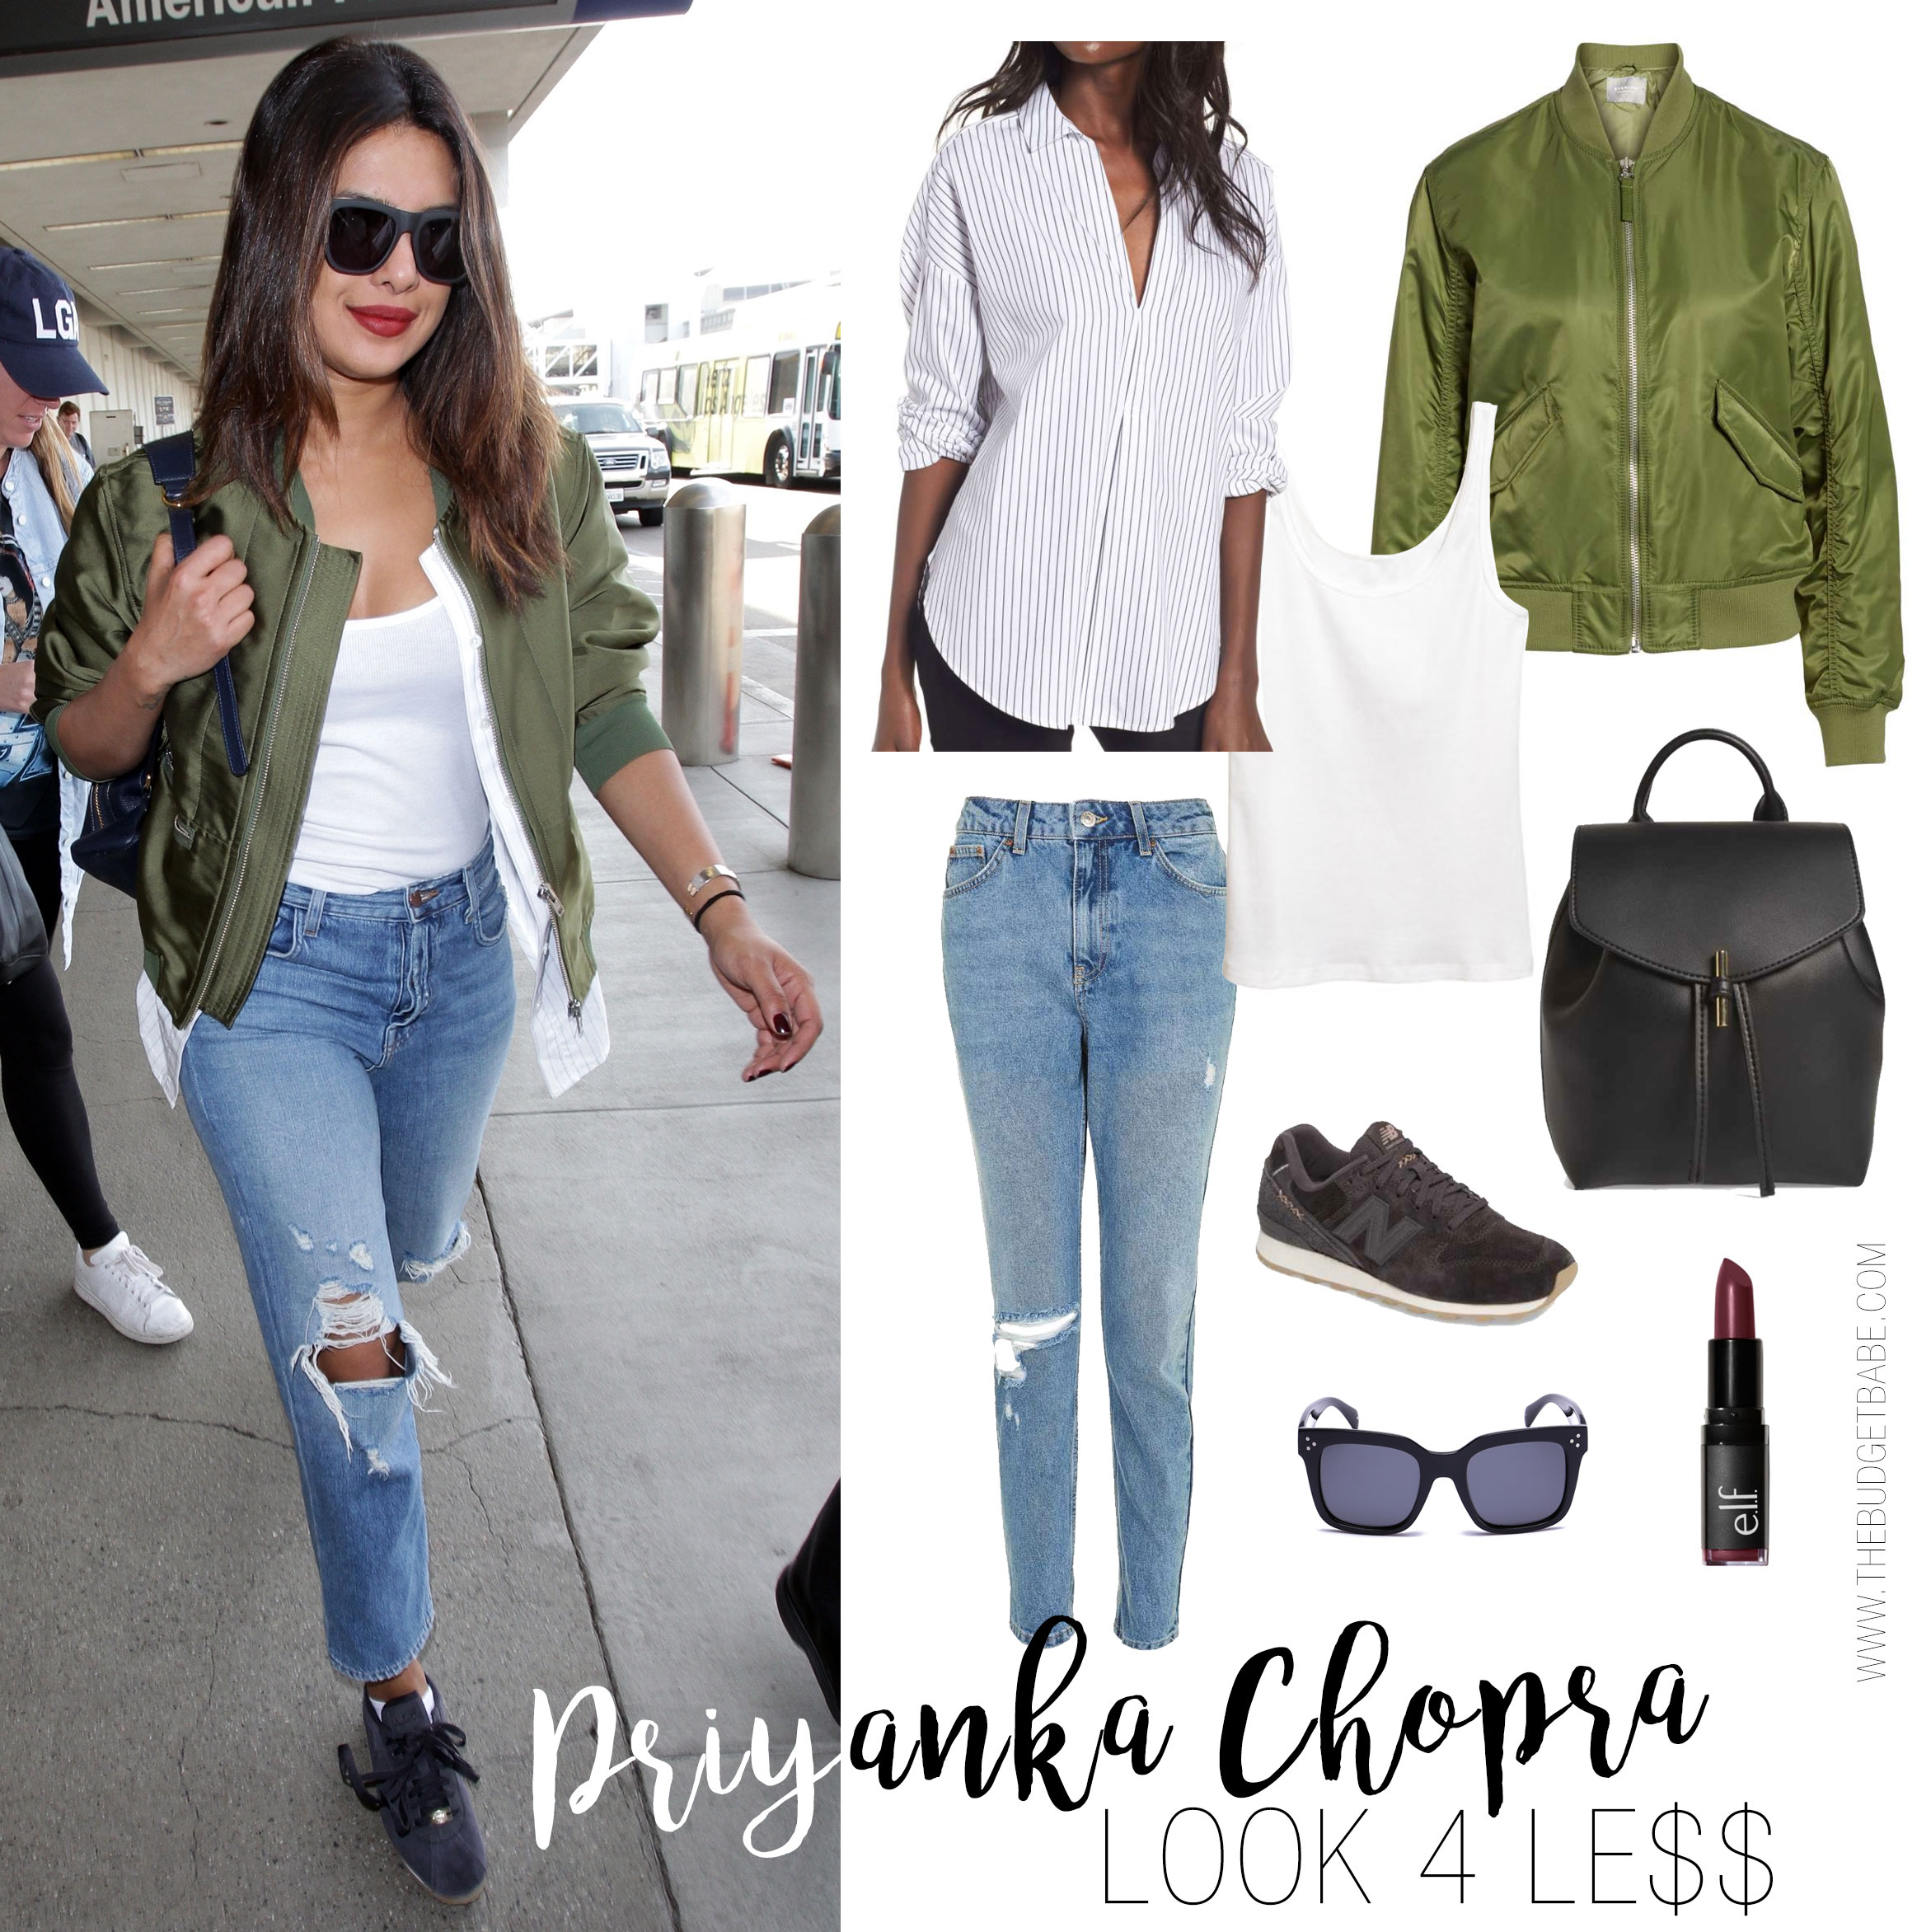 Priyanka Chopra wears a sporty olive green bomber jacket and suede sneakers while traveling through LAX airport.